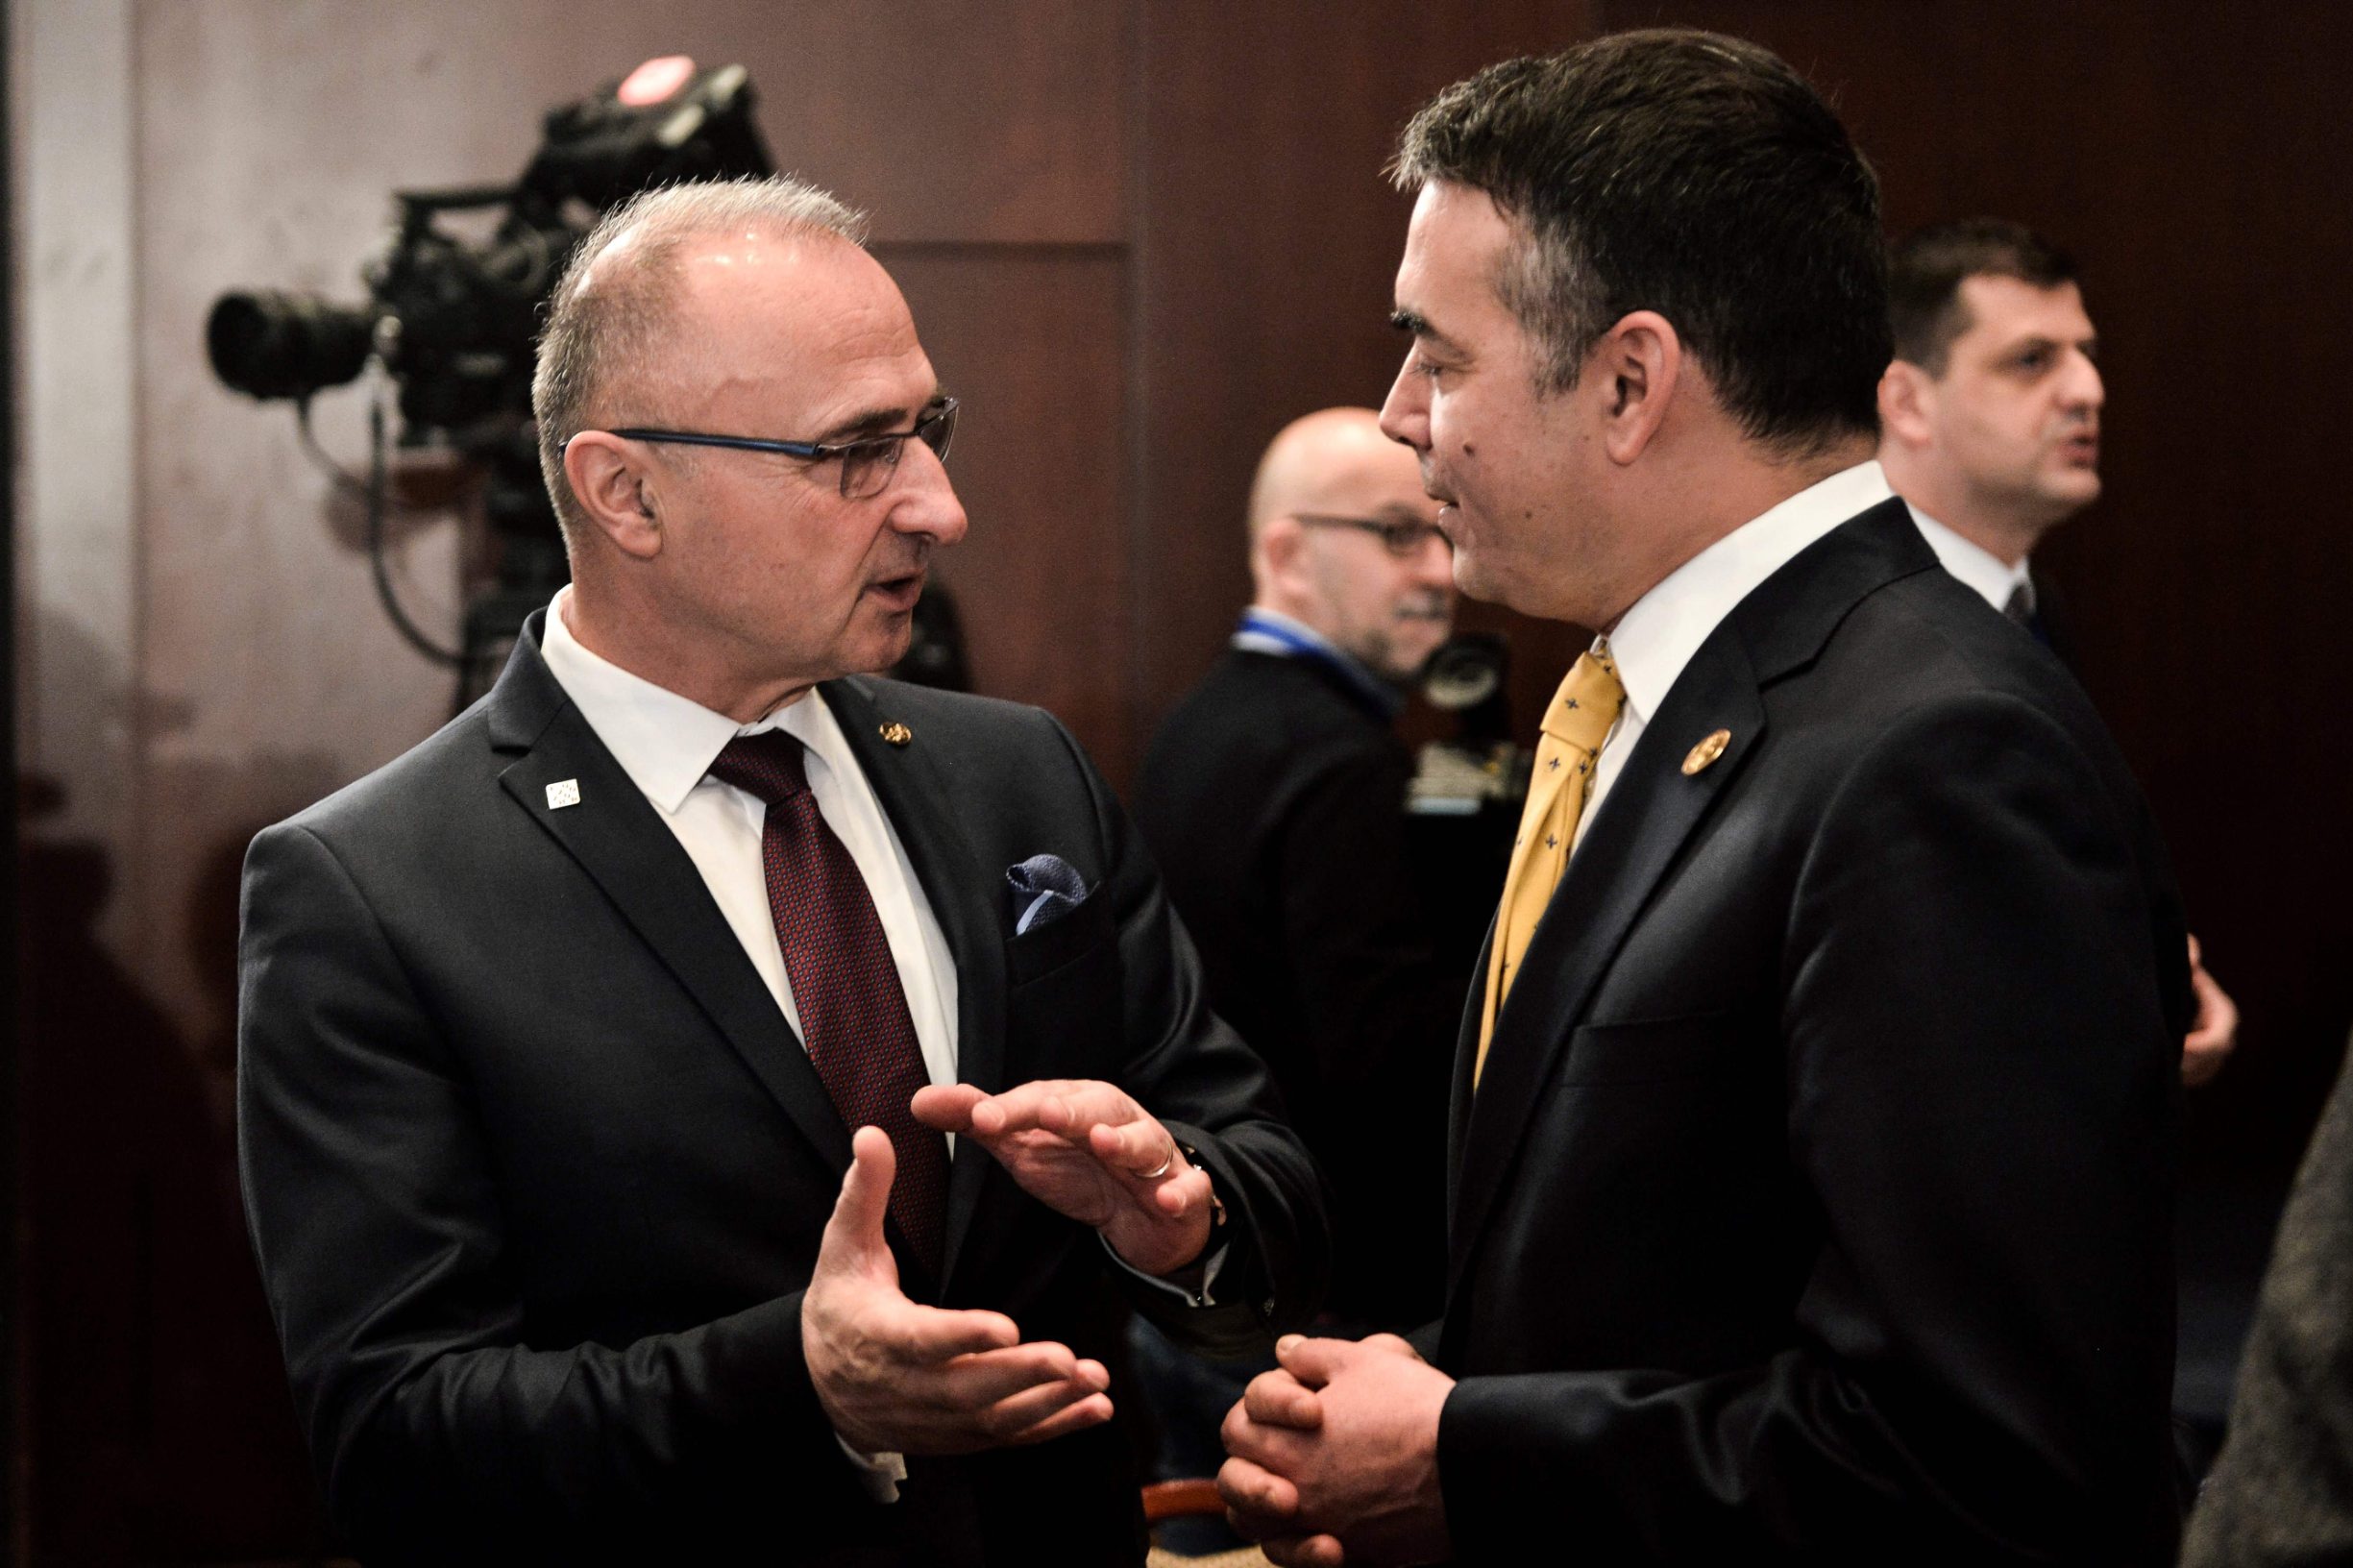 Foreign minister of North Macedonia Nikola Dimitrov (R) speaks with his counterpart of Croatia Gordan Grlic (L) during the high-level conference 